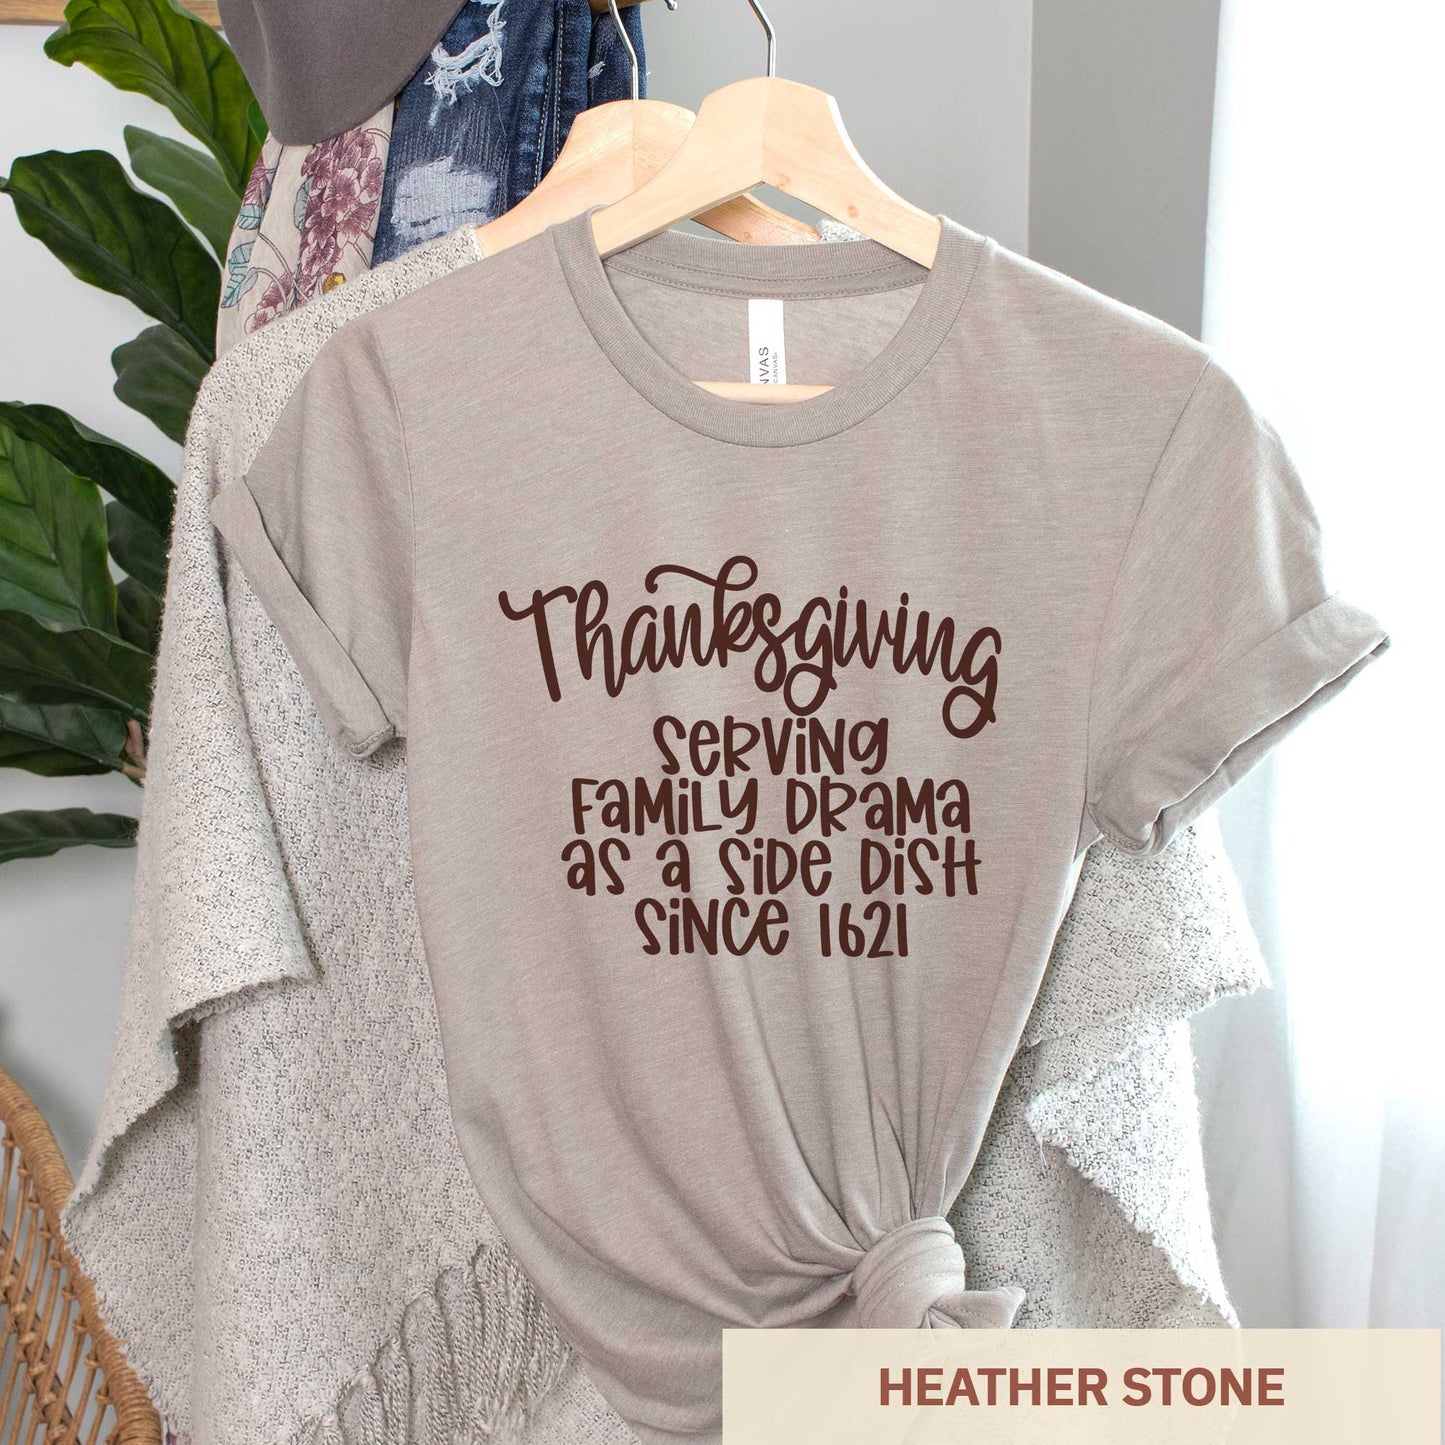 A hanging heather stone Bella Canvas t-shirt featuring the words thanksgiving serving family as a side dish since 1621.